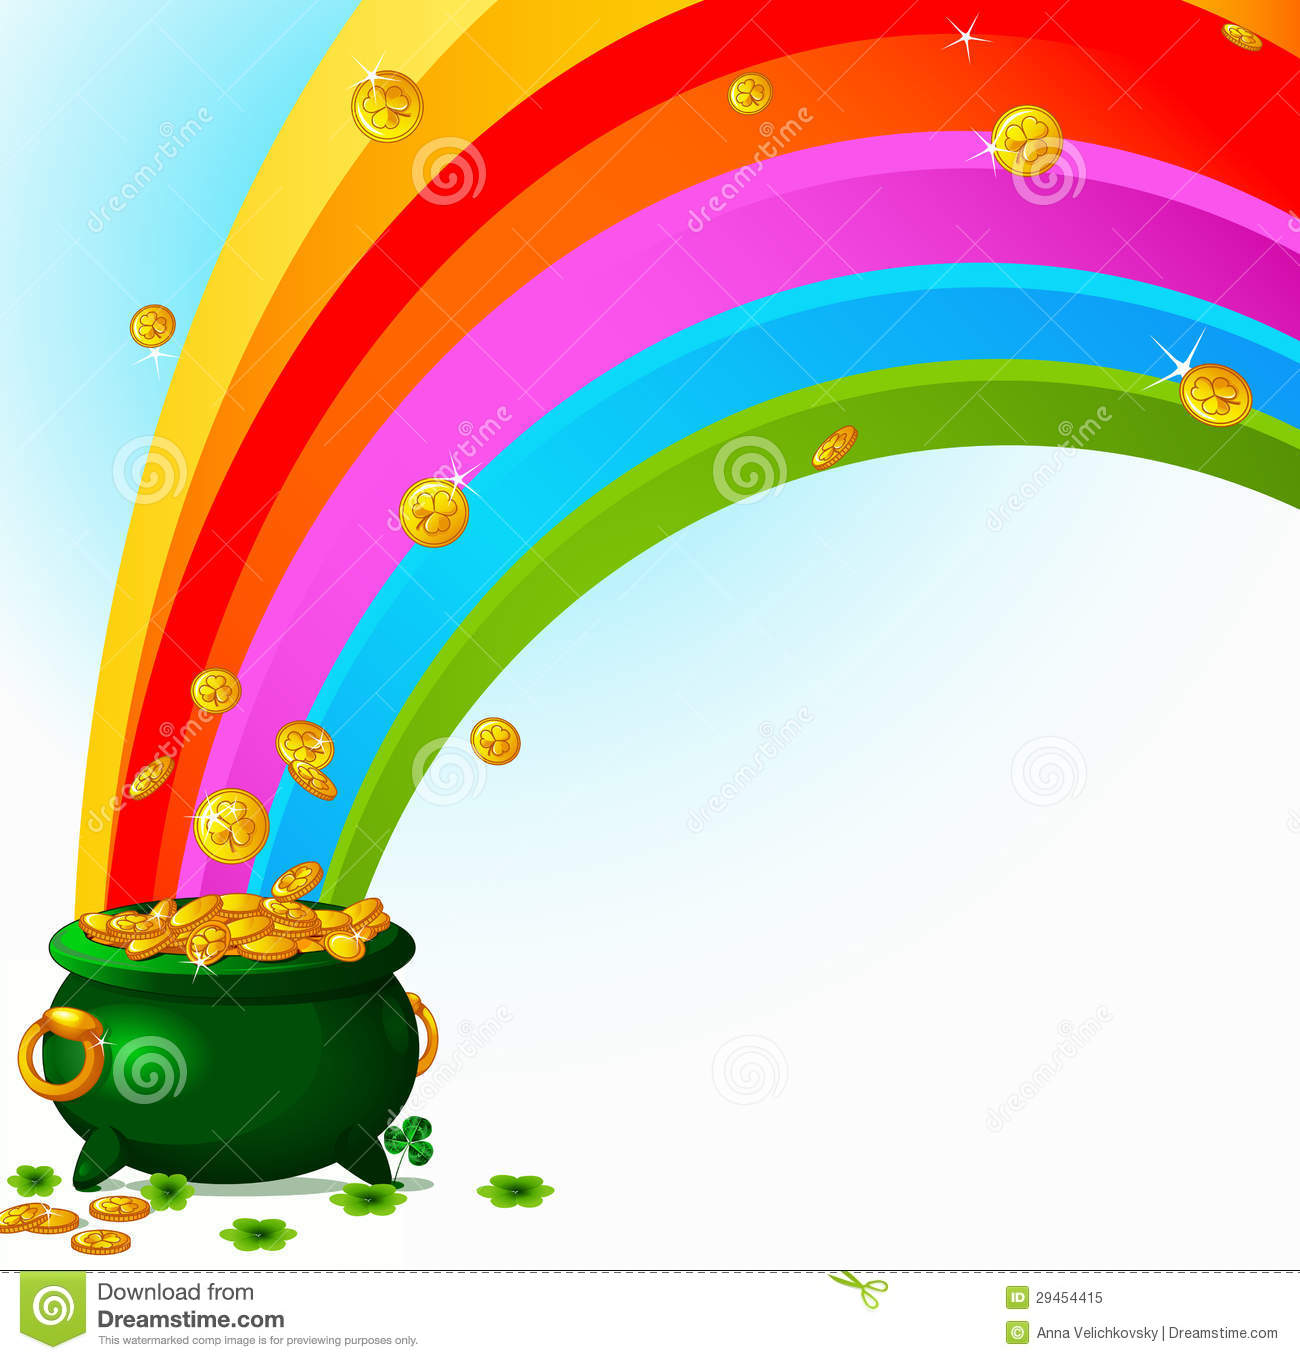 Pot Of Gold And Rainbow Royalty Free Stock Photo   Image  29454415